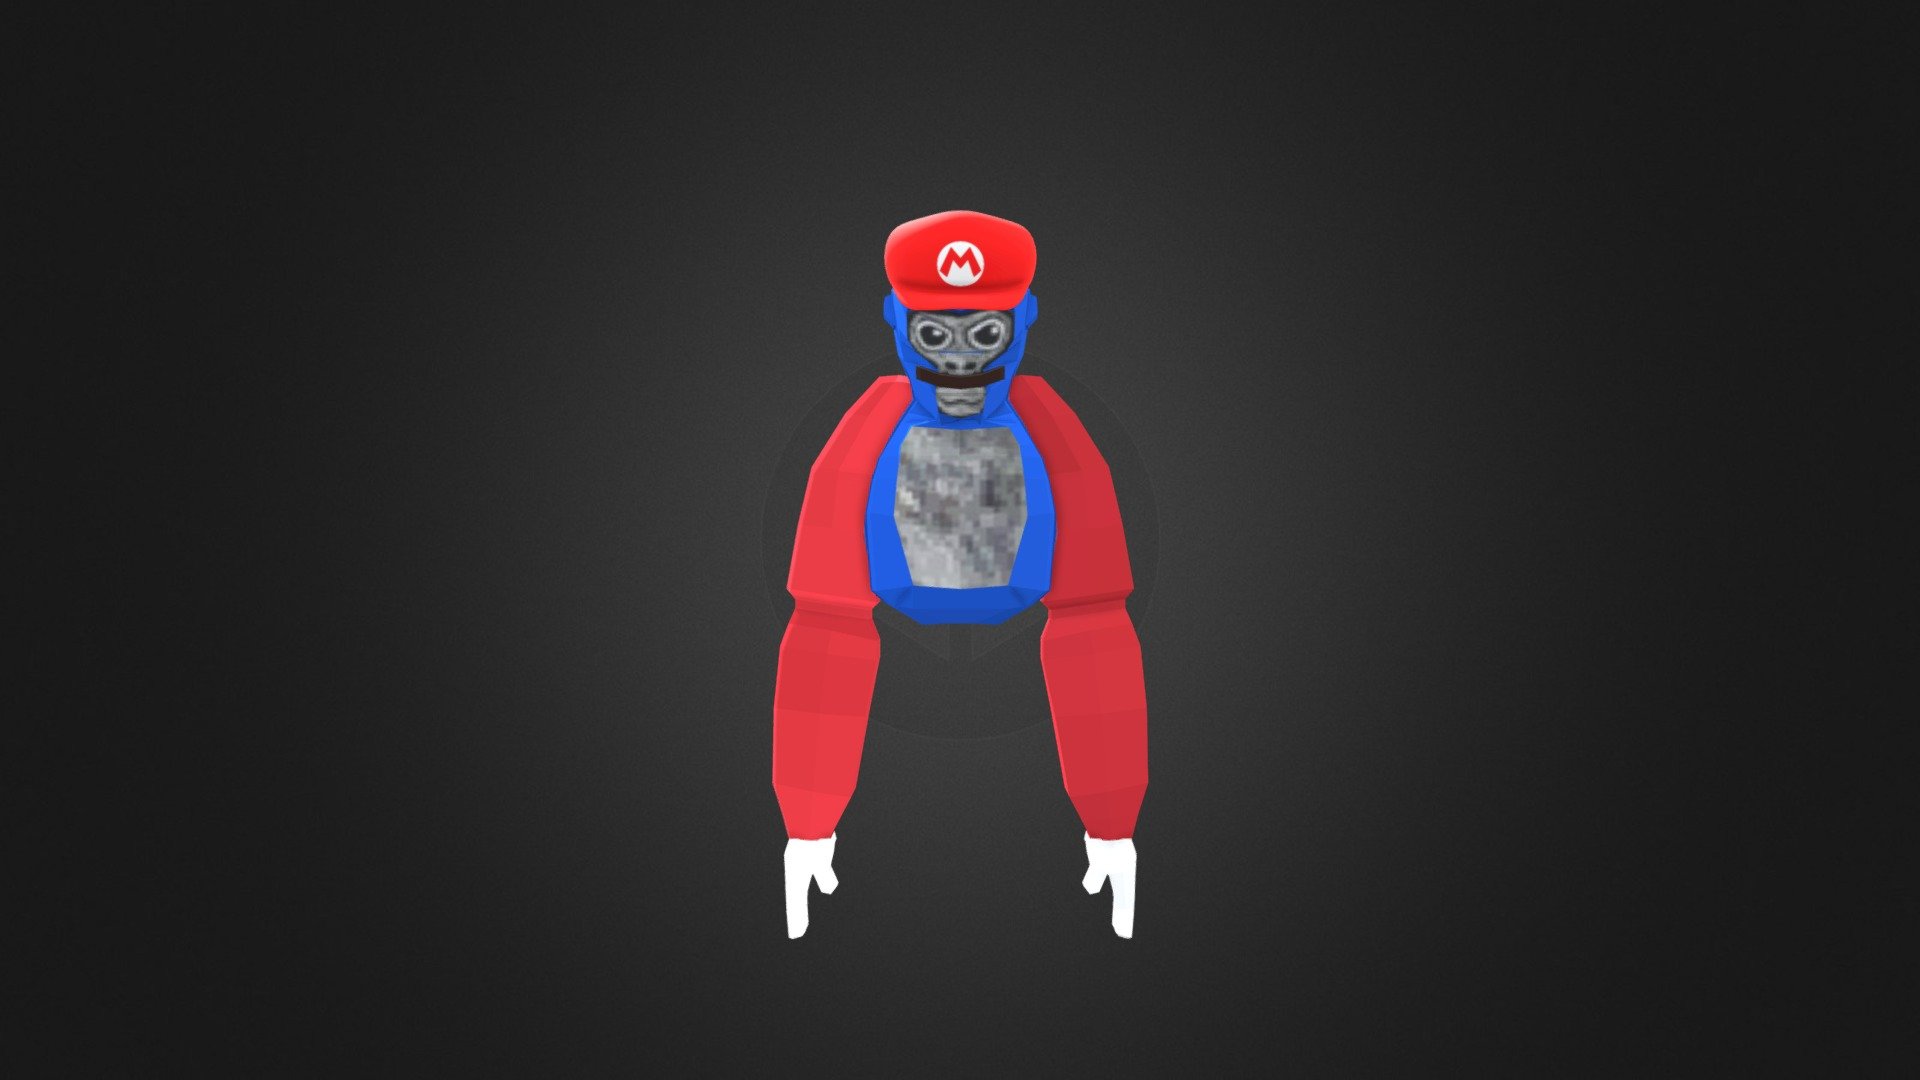 Gorilla TAG but He is Mario | #gorillatag #gorillatagvr #mario 

Download this model at for only 2$ 
https://www.buymeacoffee.com/nimagin/e/143142

I could send you it for free but this would help me do more of these characters !

Welcome to my channel! In this exciting video, I bring you a unique twist to the thrilling game of Gorilla TAG. Get ready for an epic adventure as I transform the main character into none other than Mario himself! I've created a stunning 3D model of a gorilla and blended its appearance with the iconic features of Super Mario, resulting in an incredible fusion that will blow your mind. 

Gorilla TAG but He is Mario | #GorillaTAGMarioFusion #gorillatag #gorillatagvr #mario - Gorilla Mario | Download | #Gorillatag - 3D model by Nofil.Khan 3d model